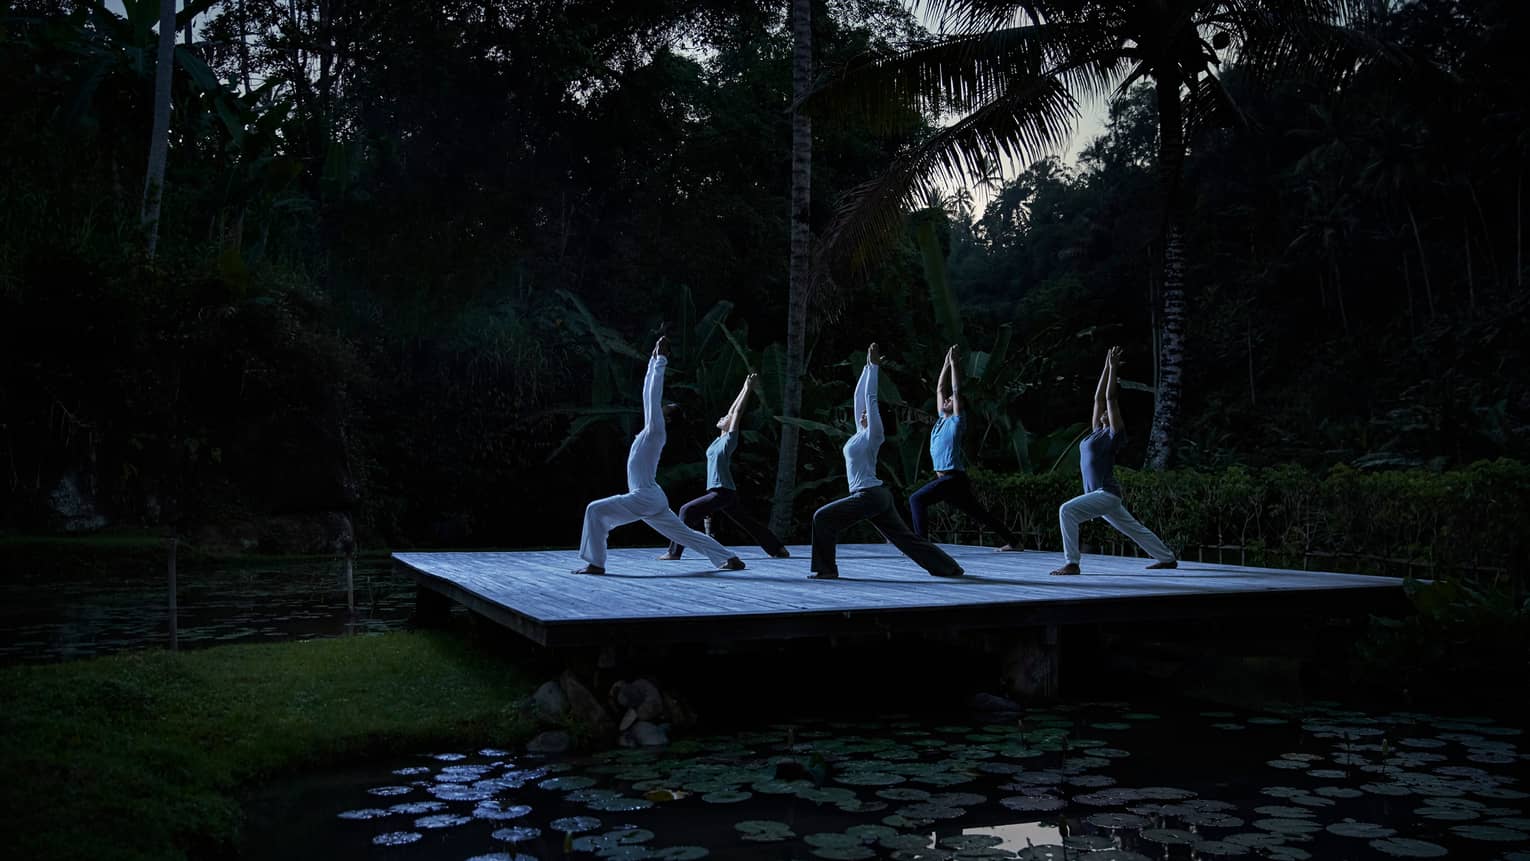 Five people kneel in yoga pose with arms above head on wood platform in forest at night